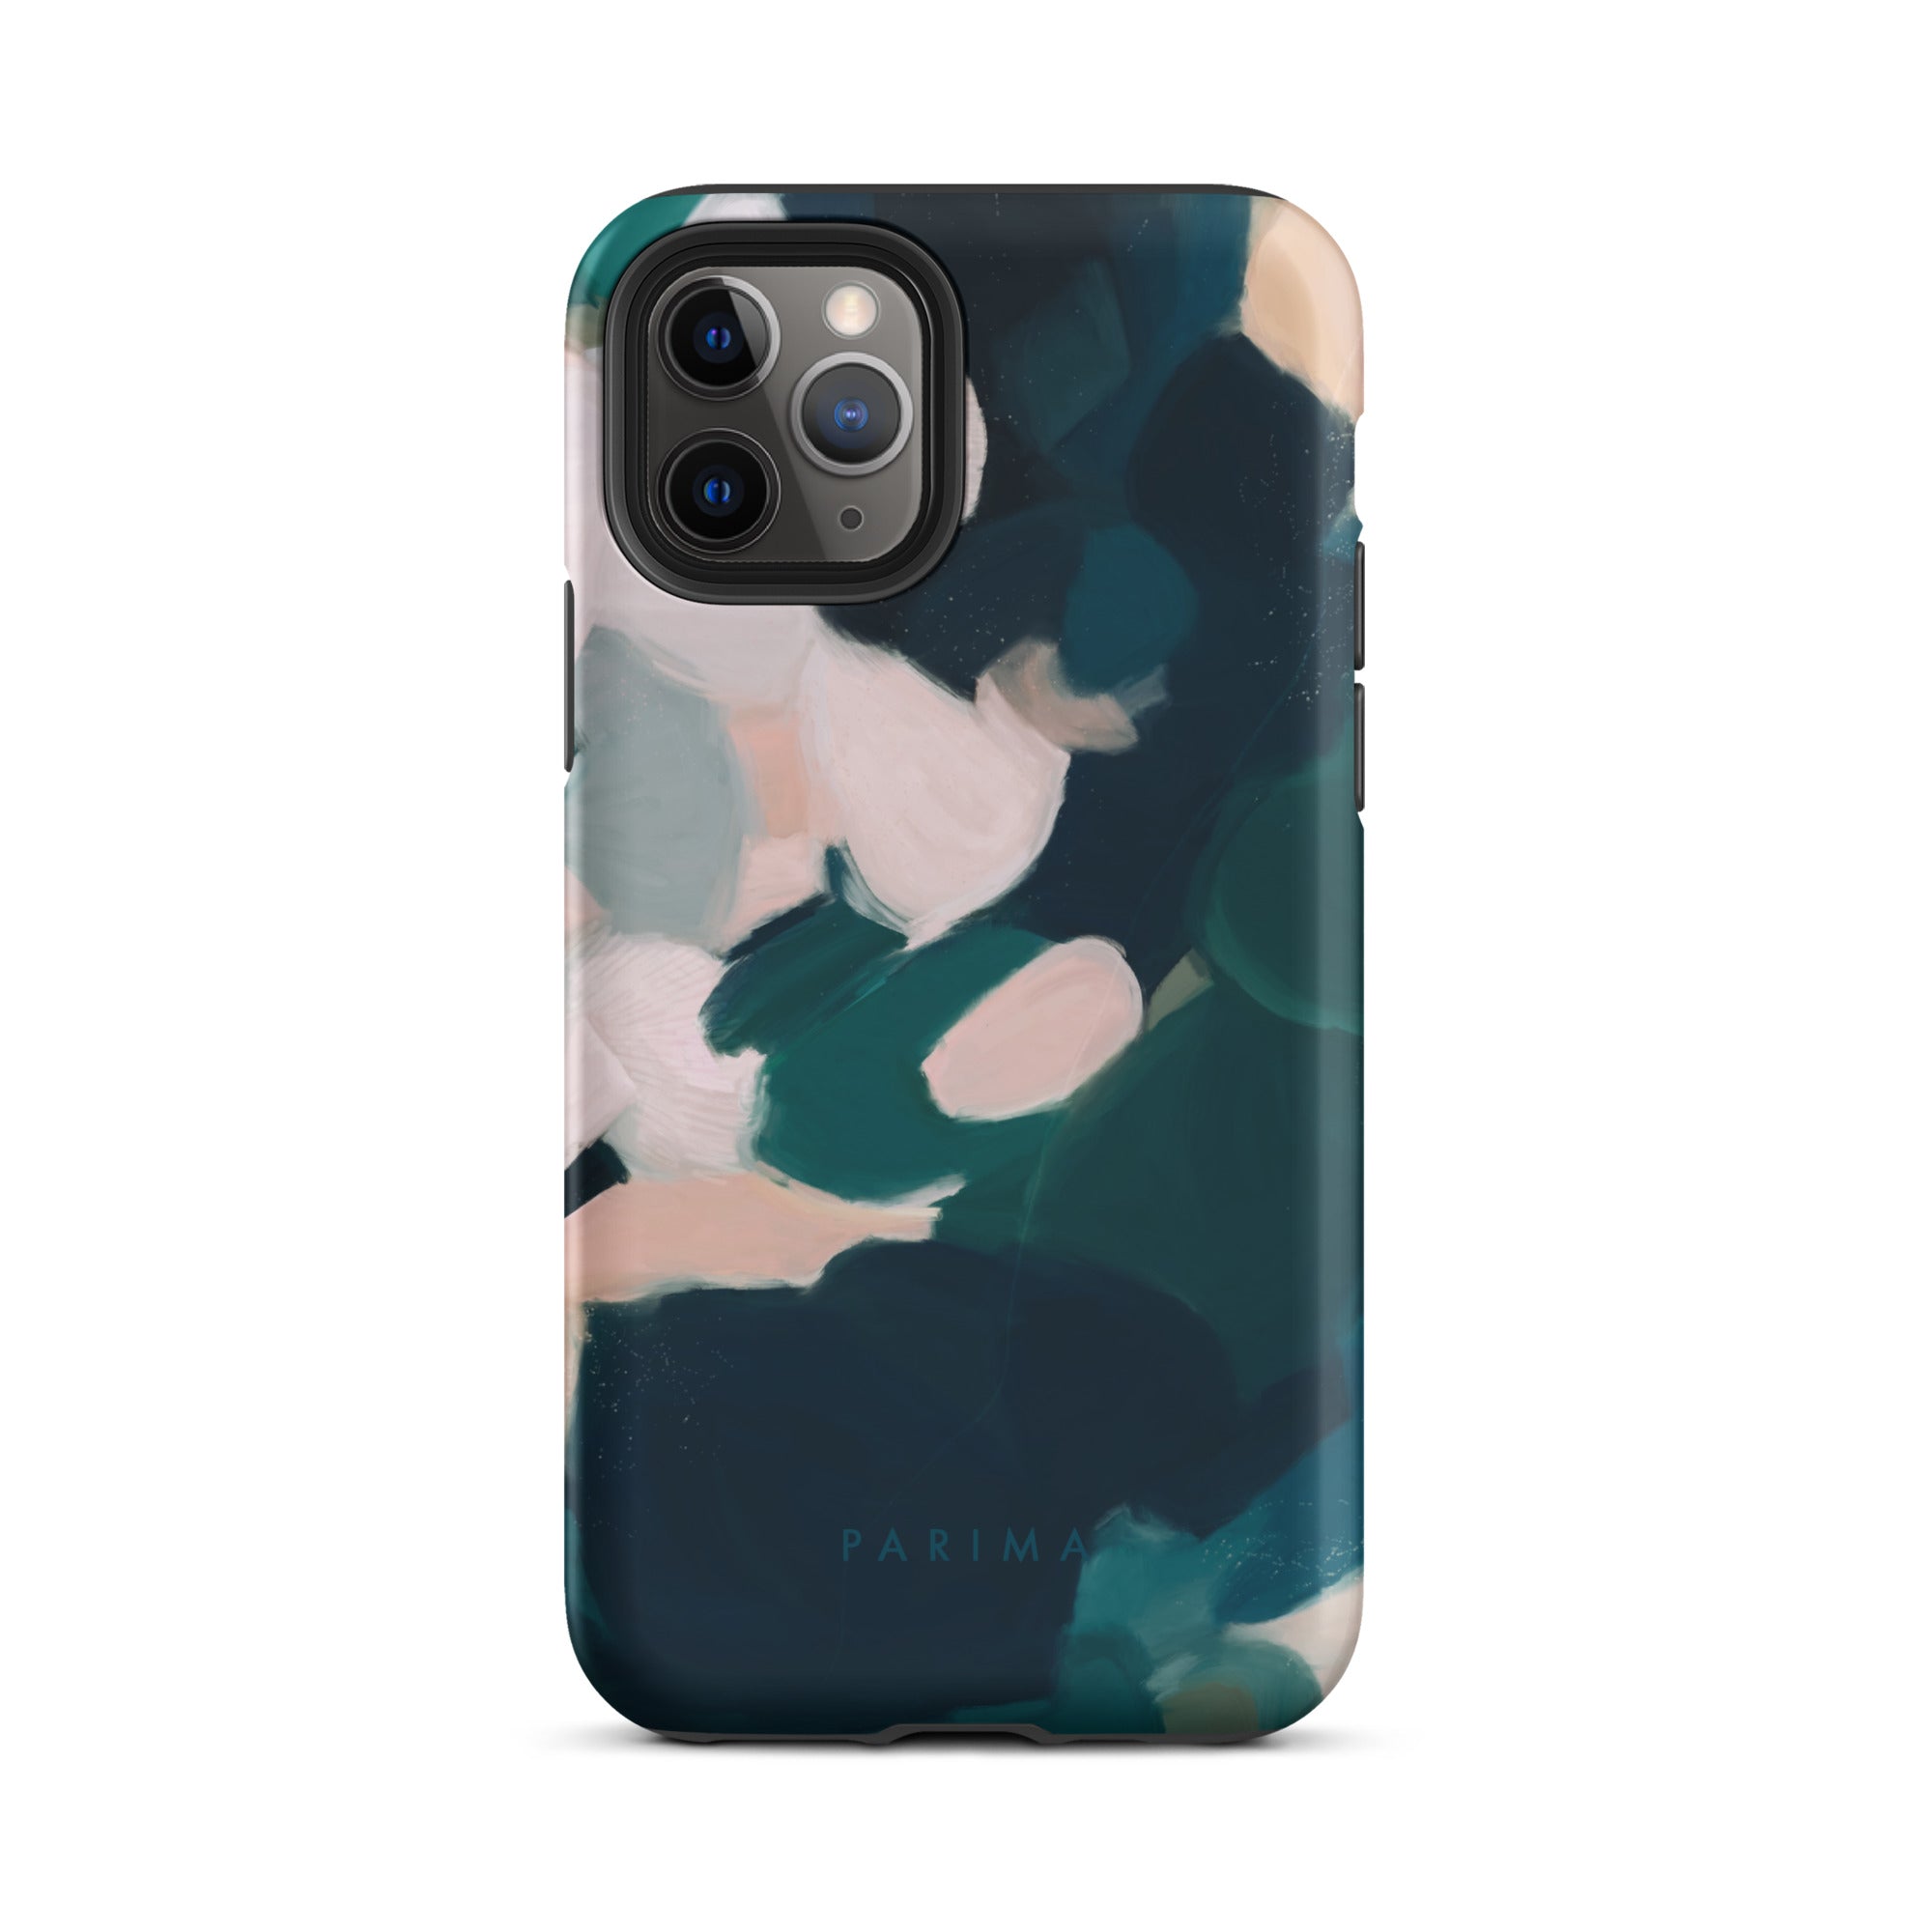 Aerwyn, green and pink abstract art - iPhone 11 Pro tough case by Parima Studio